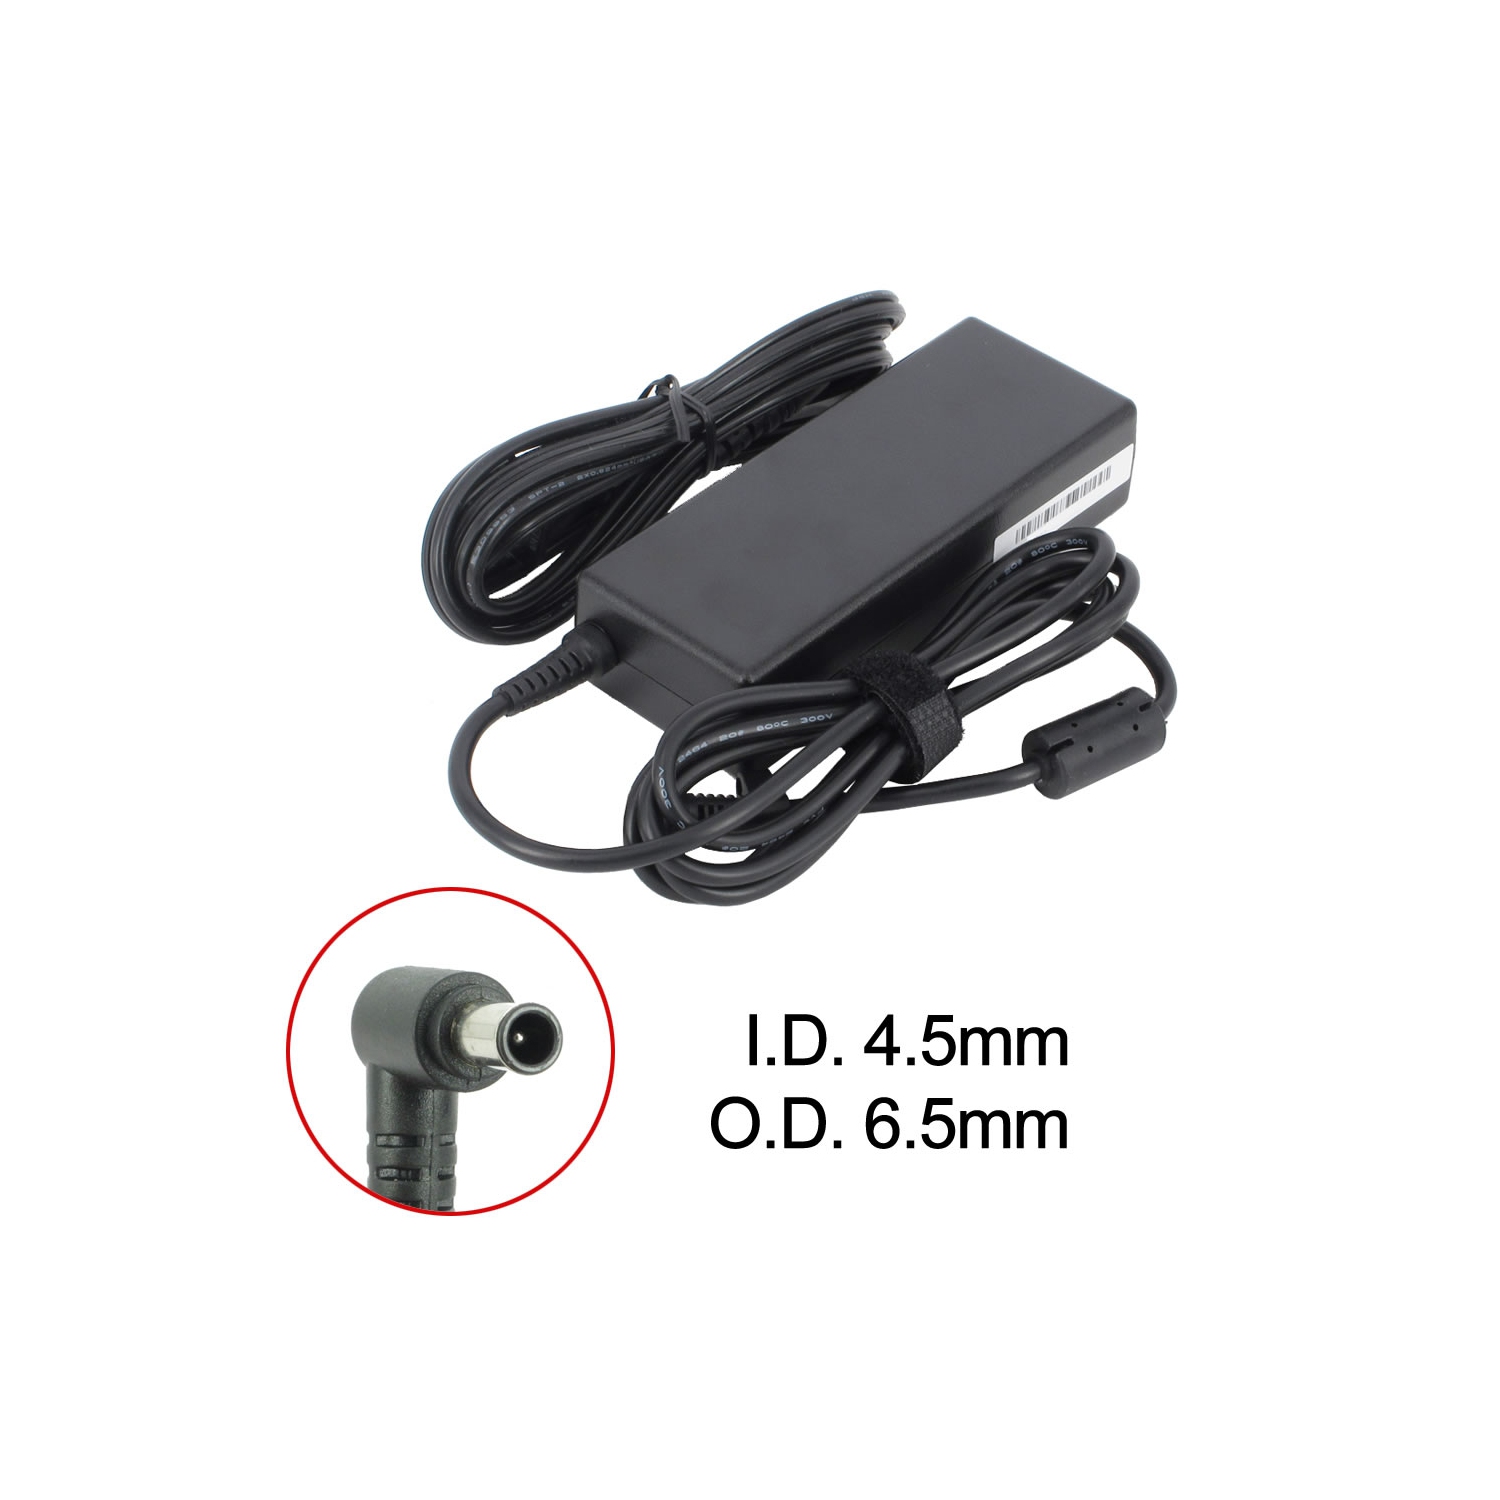 Brand New Laptop AC Adapter for Sony VAIO VPC-EB12FX/BIC, PCGA-AC19V13, VGP-AC19V12, VGP-AC19V23, VGP-AC19V37, VGP-AC19V76